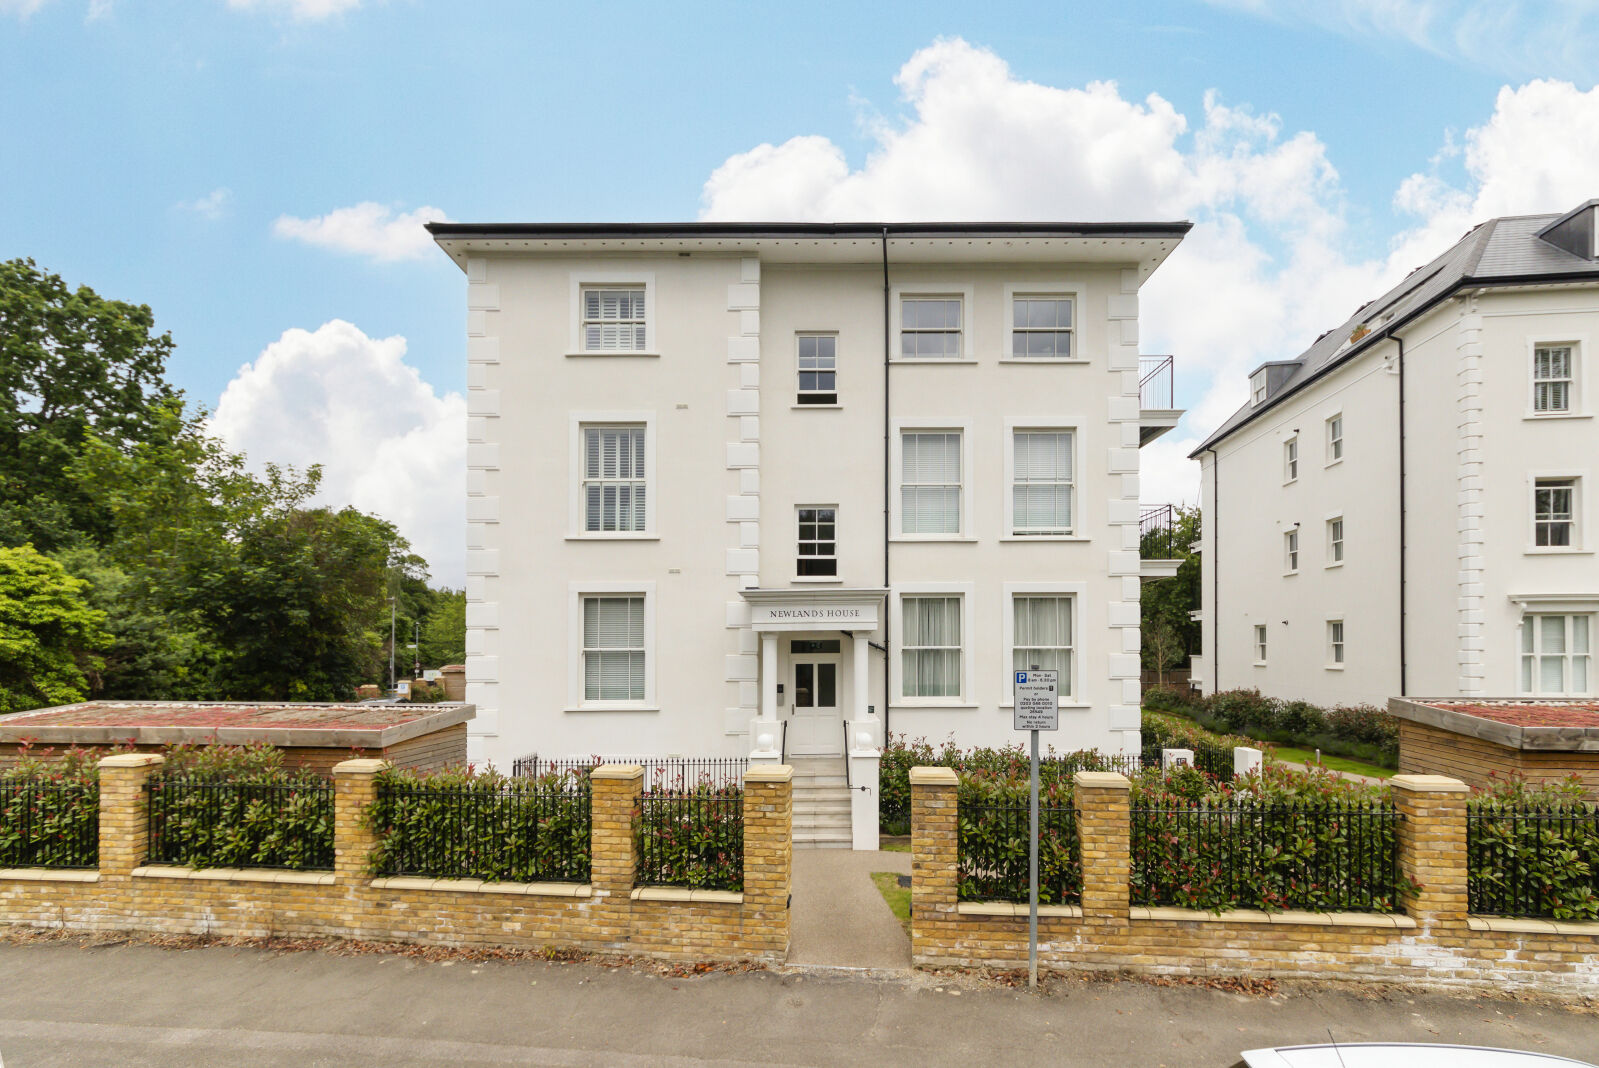 3 bedroom  flat to rent, Available unfurnished now Oak Hill Road, Surbiton, KT6, main image